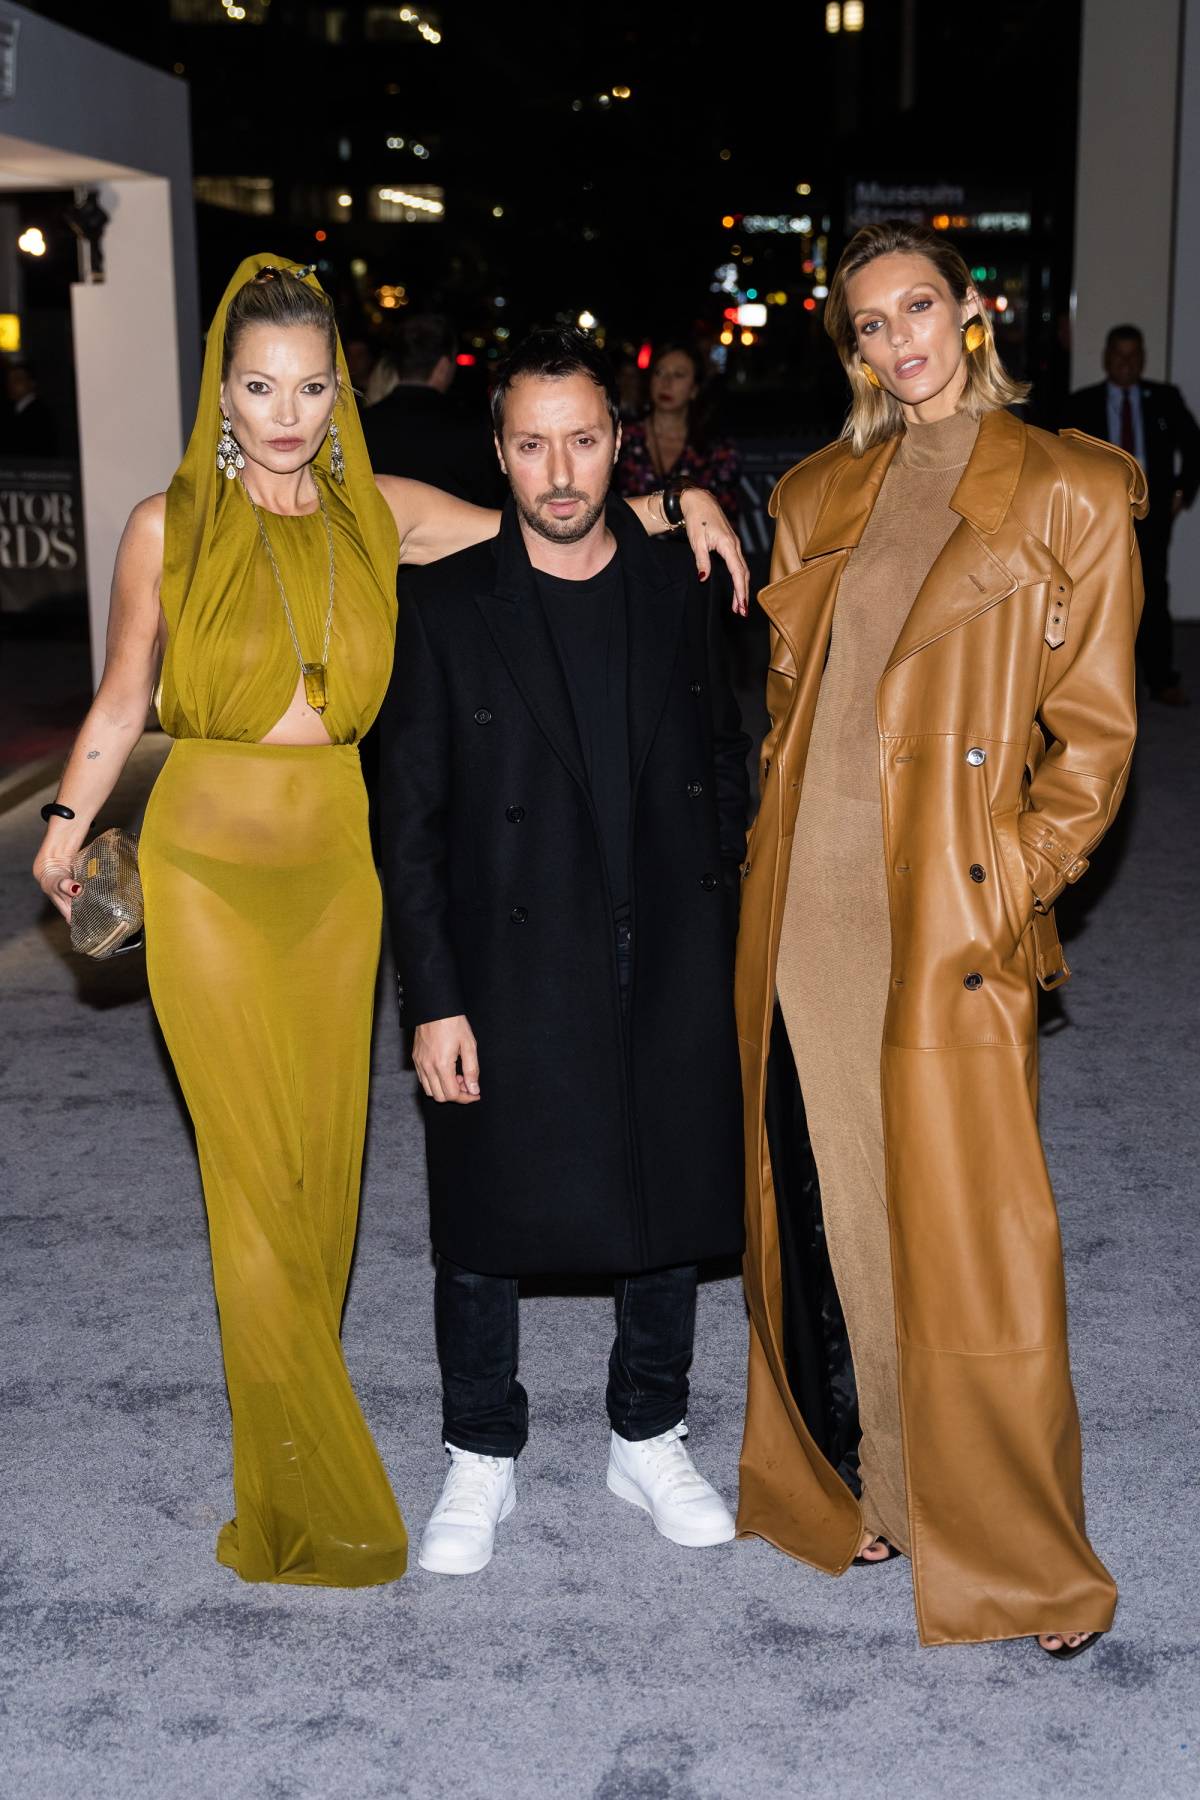 Kate Moss, Anthony Vaccarello i Anja Rubik (Fot. Getty Images)